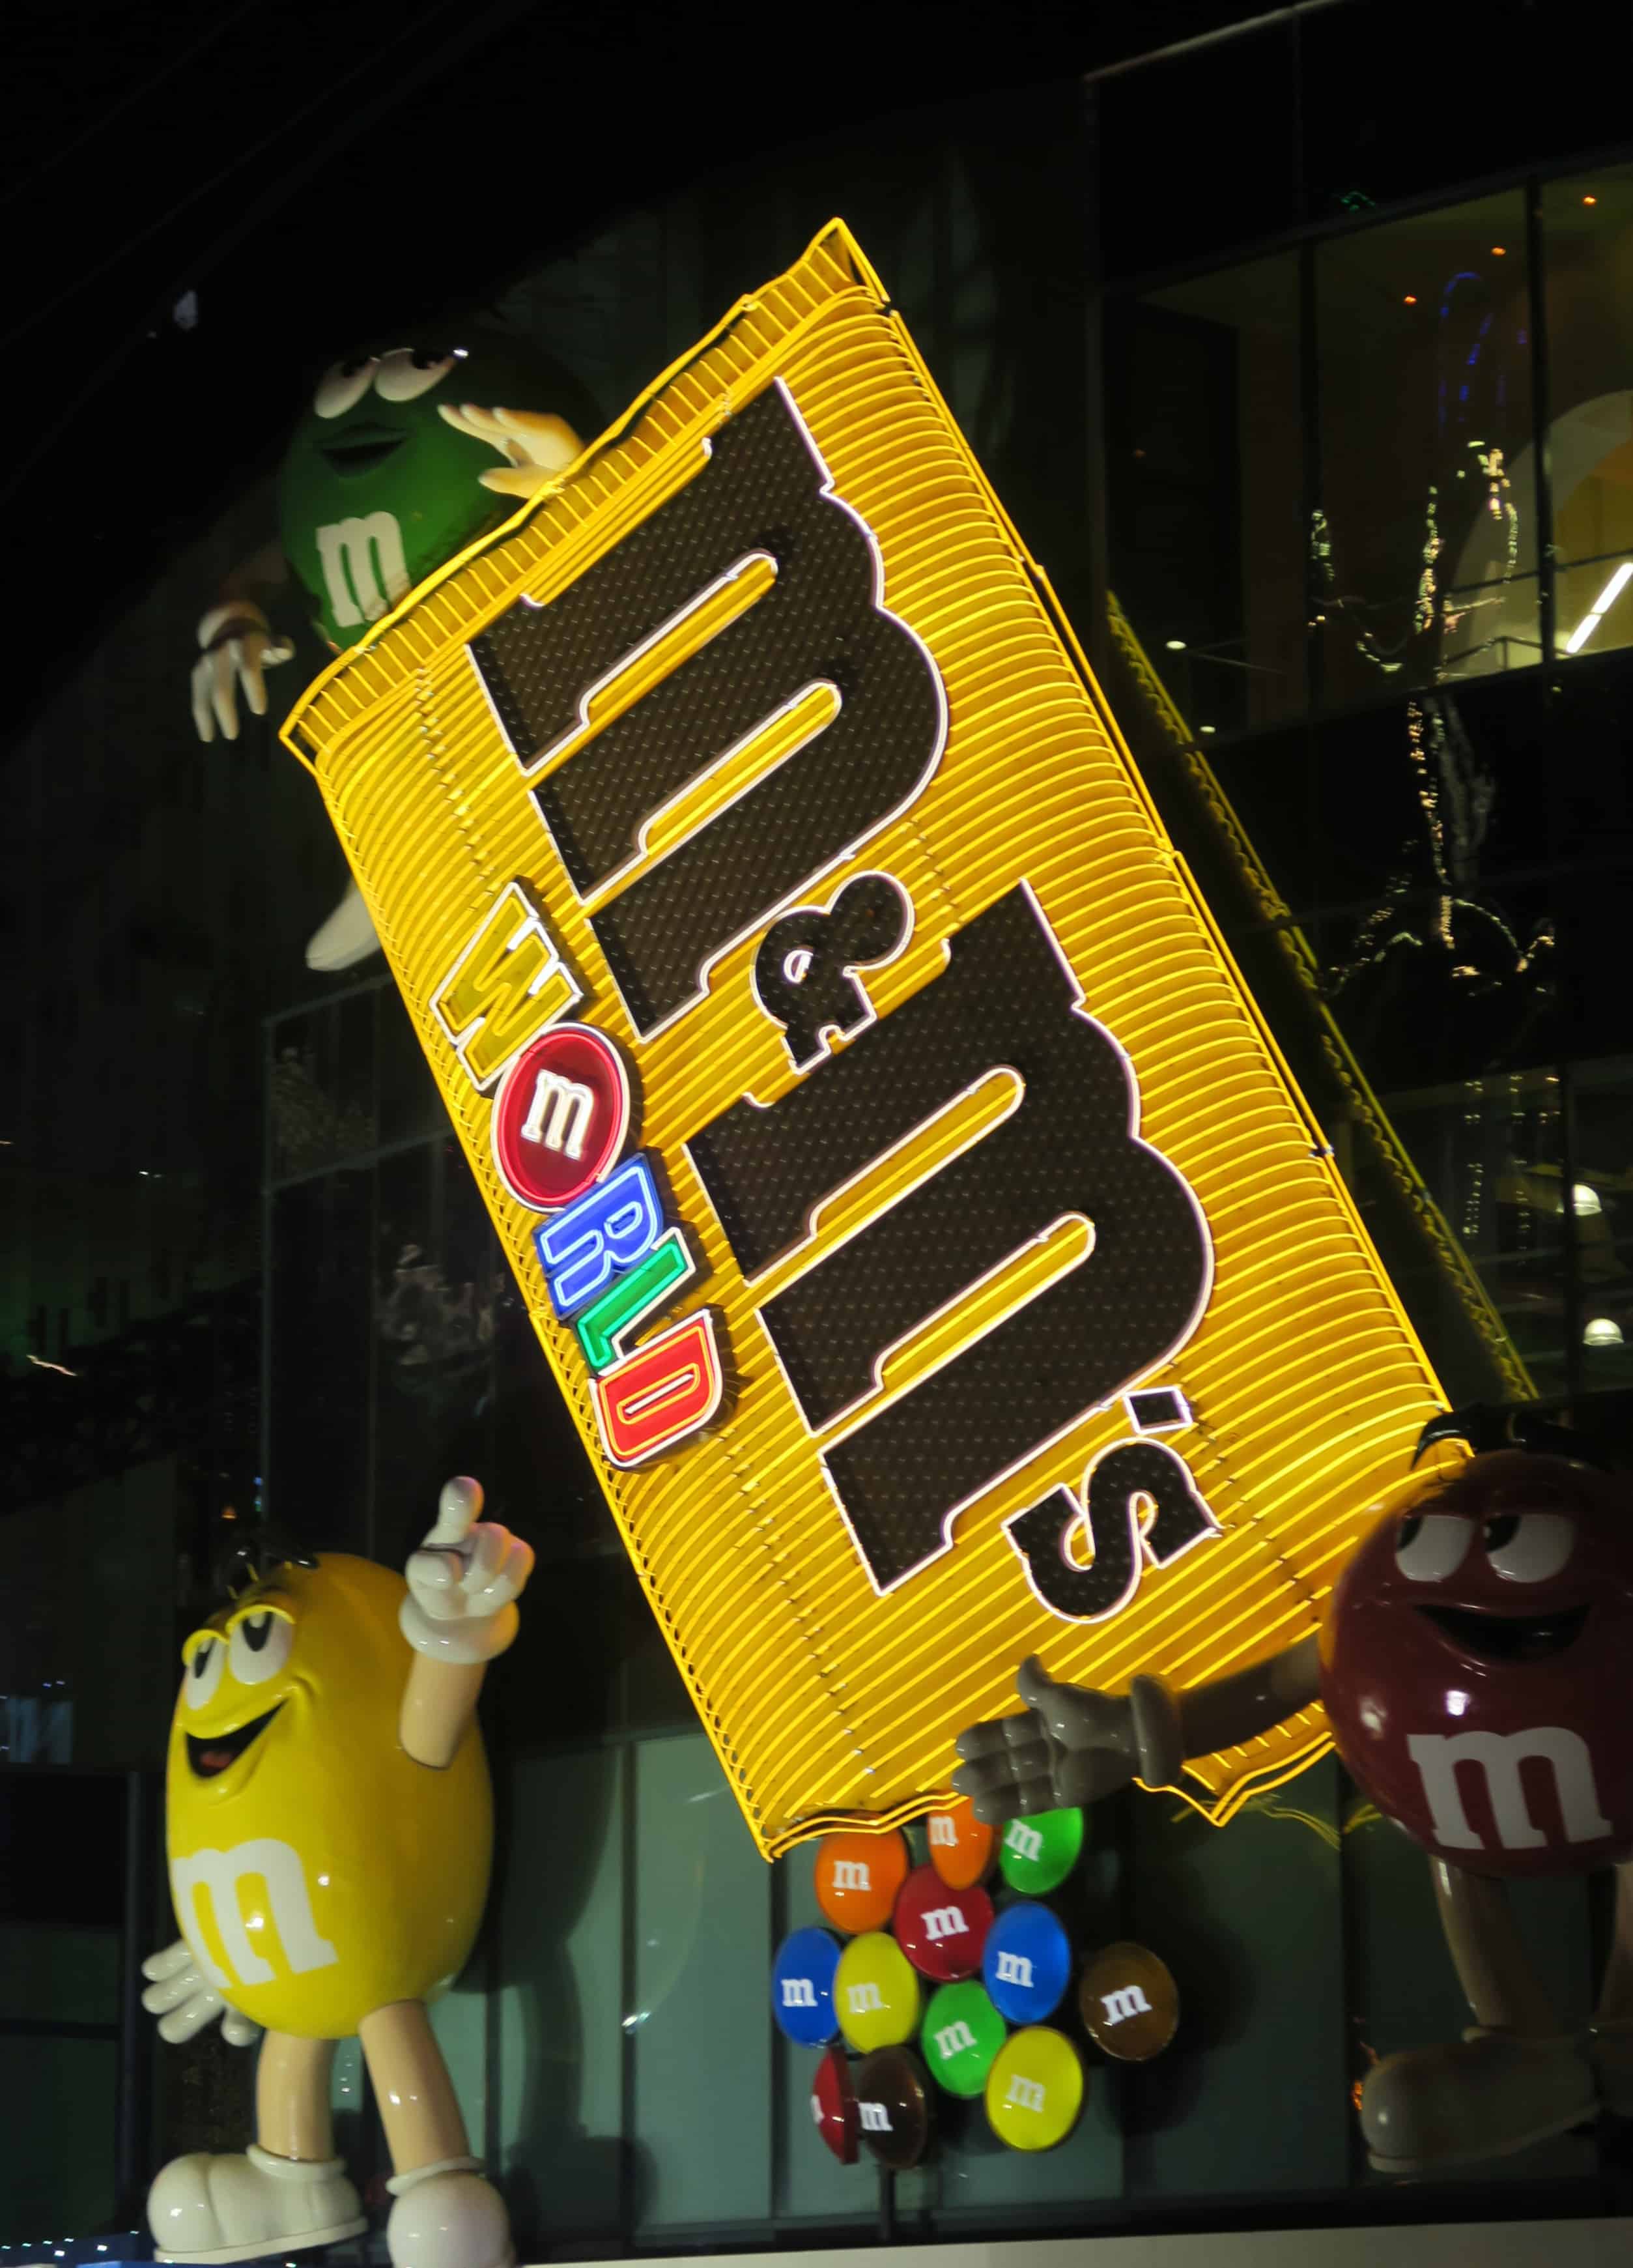 The M & M's Store